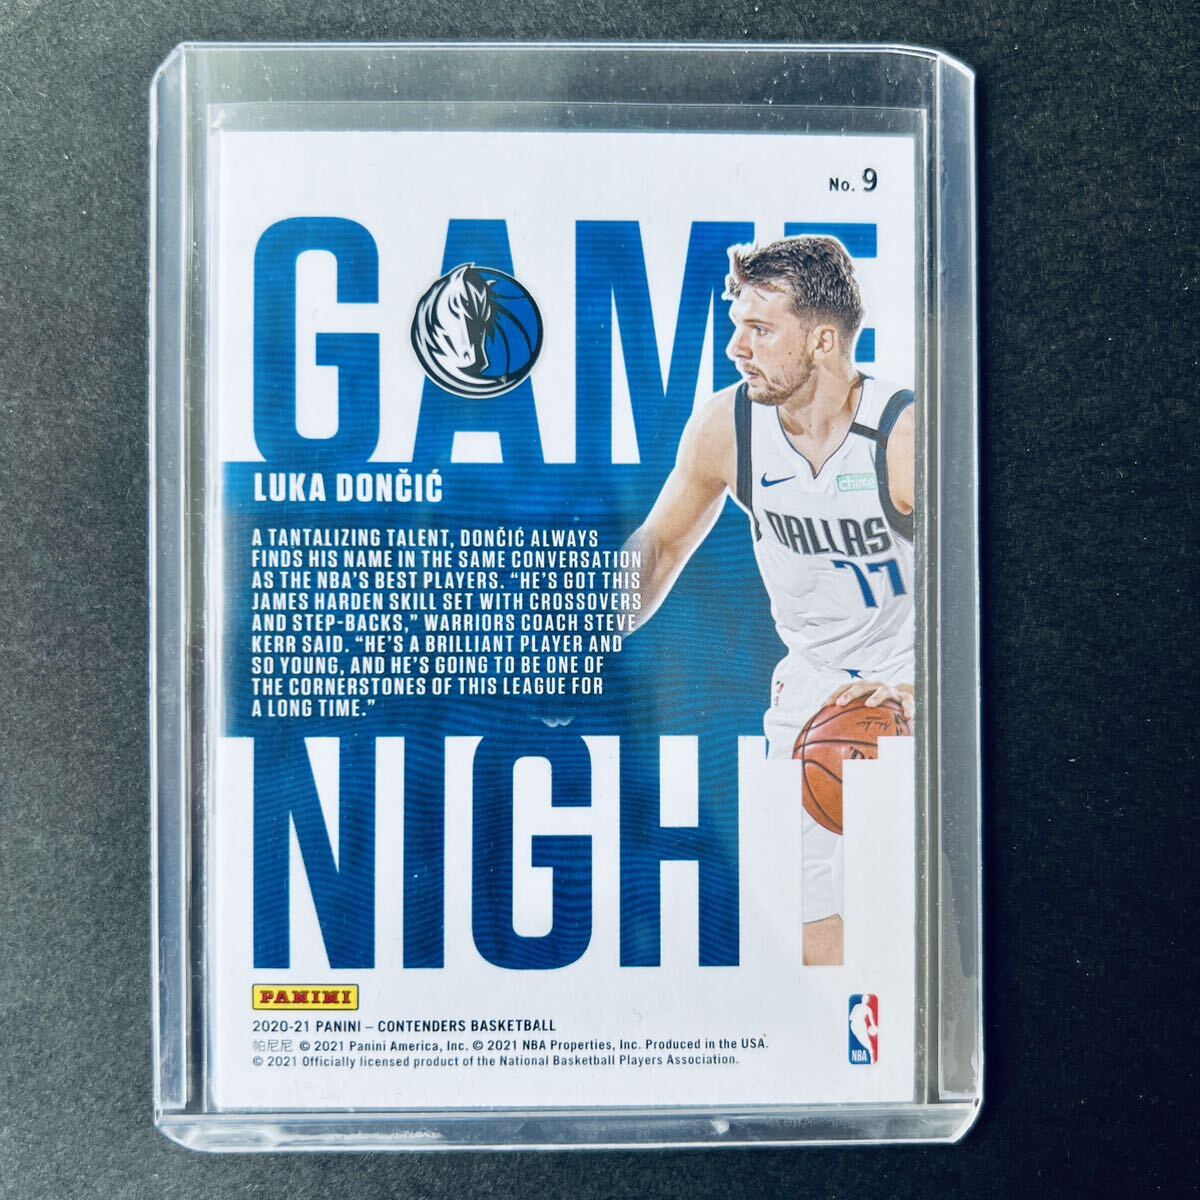 Panini NBAカード Luka Doncic 2020-21 contenders basketball GAME HIGH red parallel _画像2